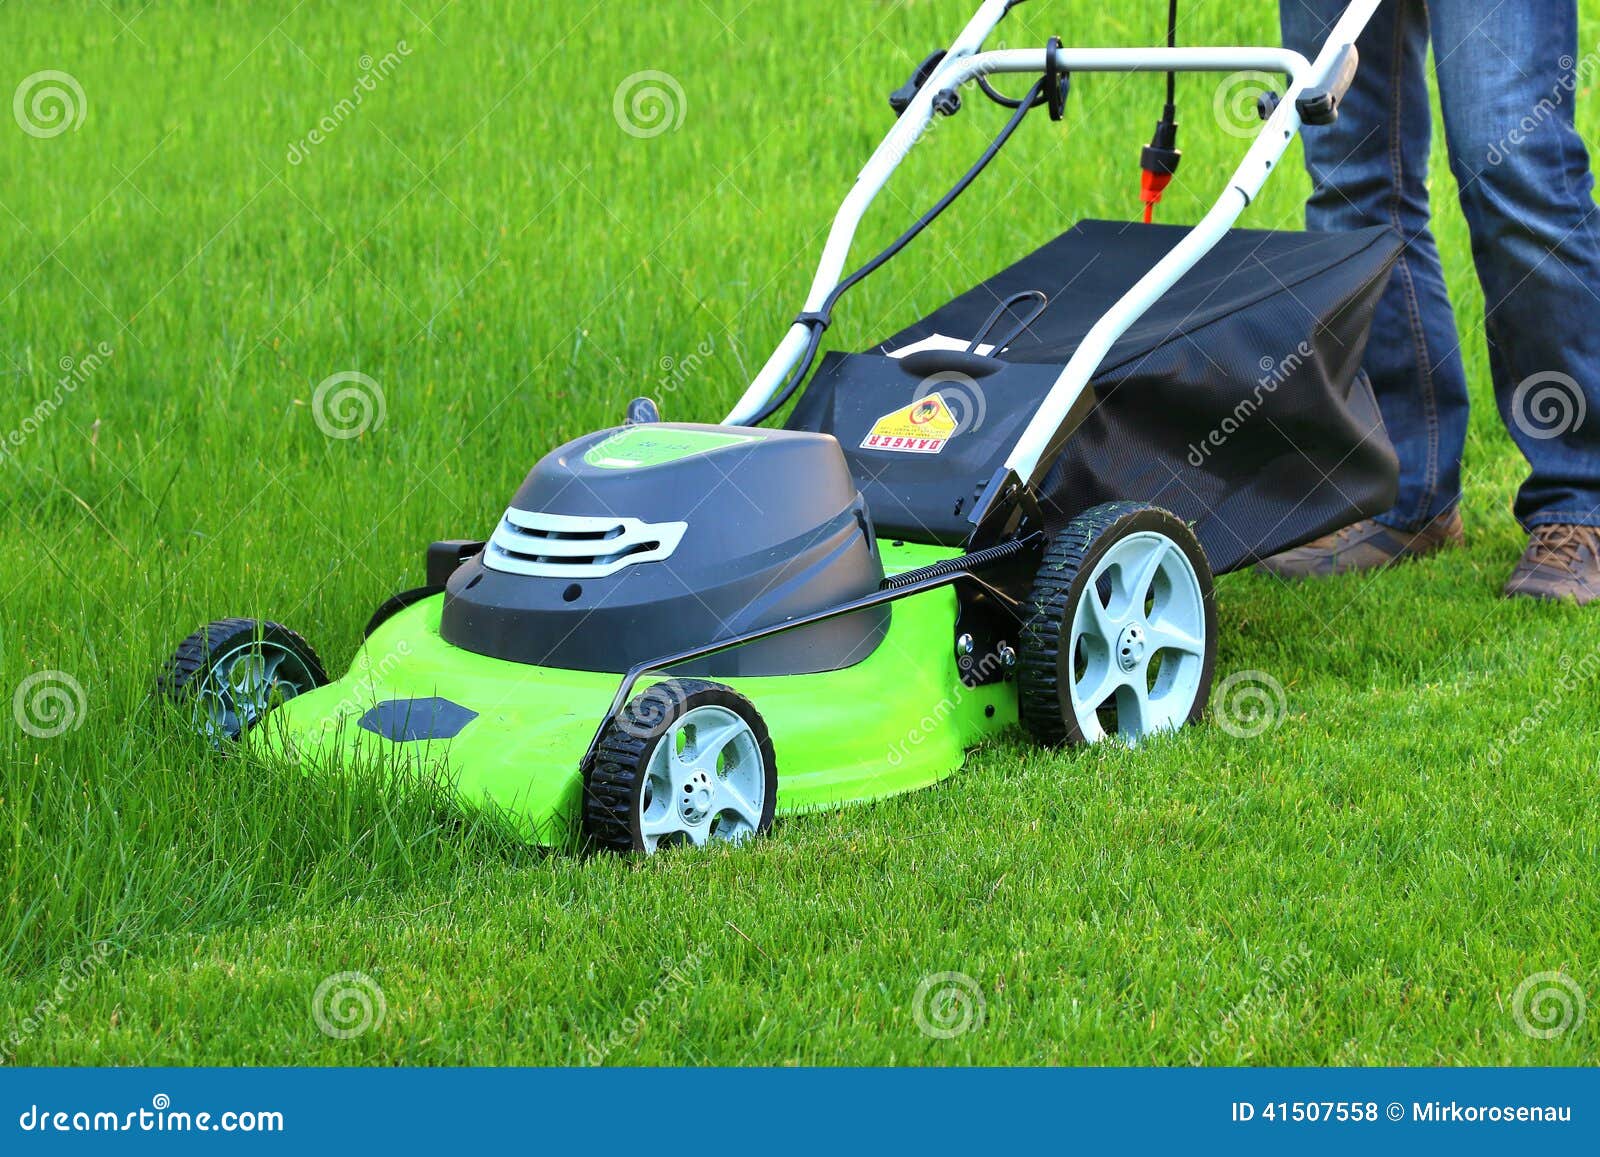 man cutting the grass with lawn mower